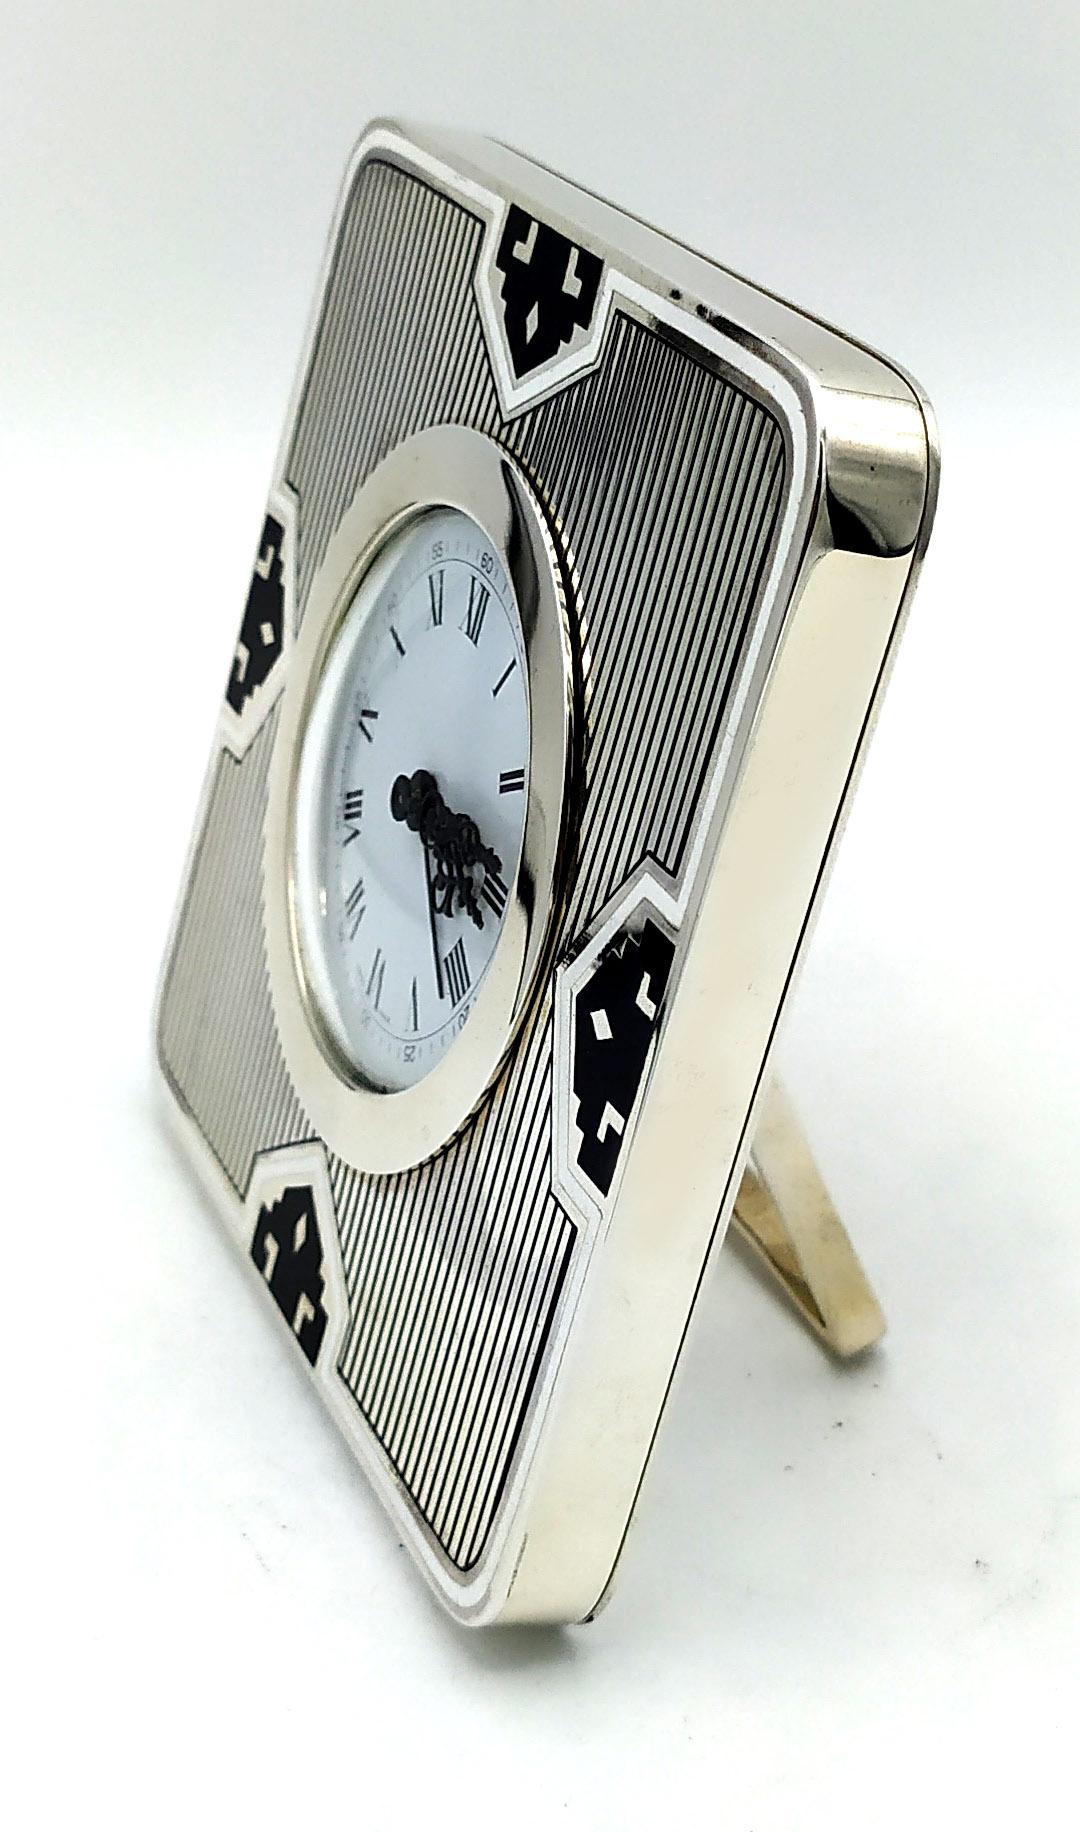 Square table clock with rounded corners in 925/1000 sterling silver with fire-enamelled Art Deco design. Dimensions cm. 11.8 x 11.8. Silver weight gr. 449. Swiss mechanical movement with 8-day charge and alarm. Designed by Giorgio Salimbeni in 1976